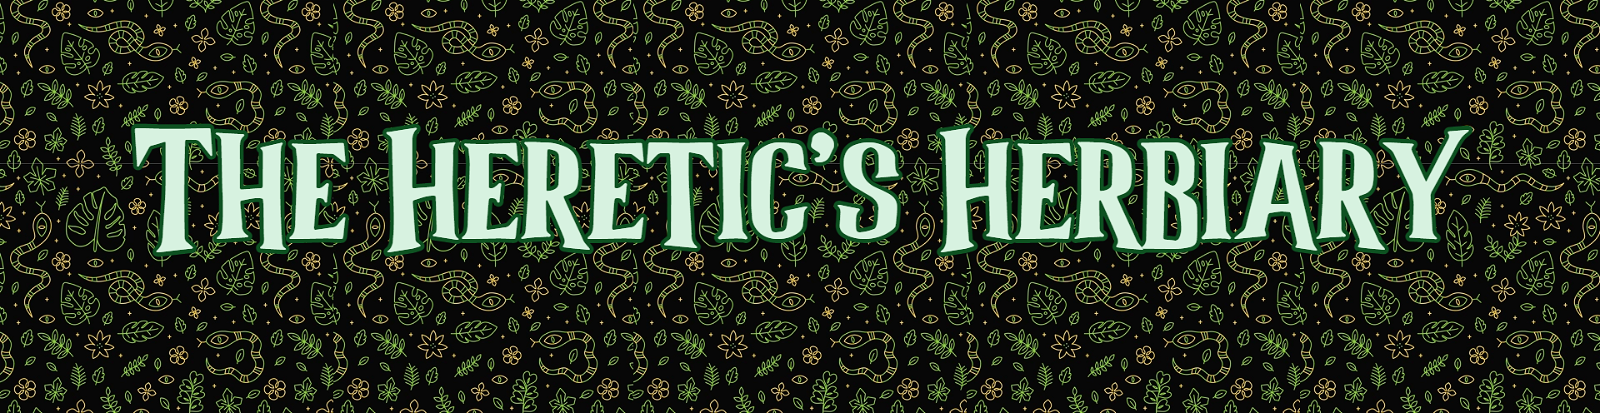 The Heretic's Herbiary vol #09